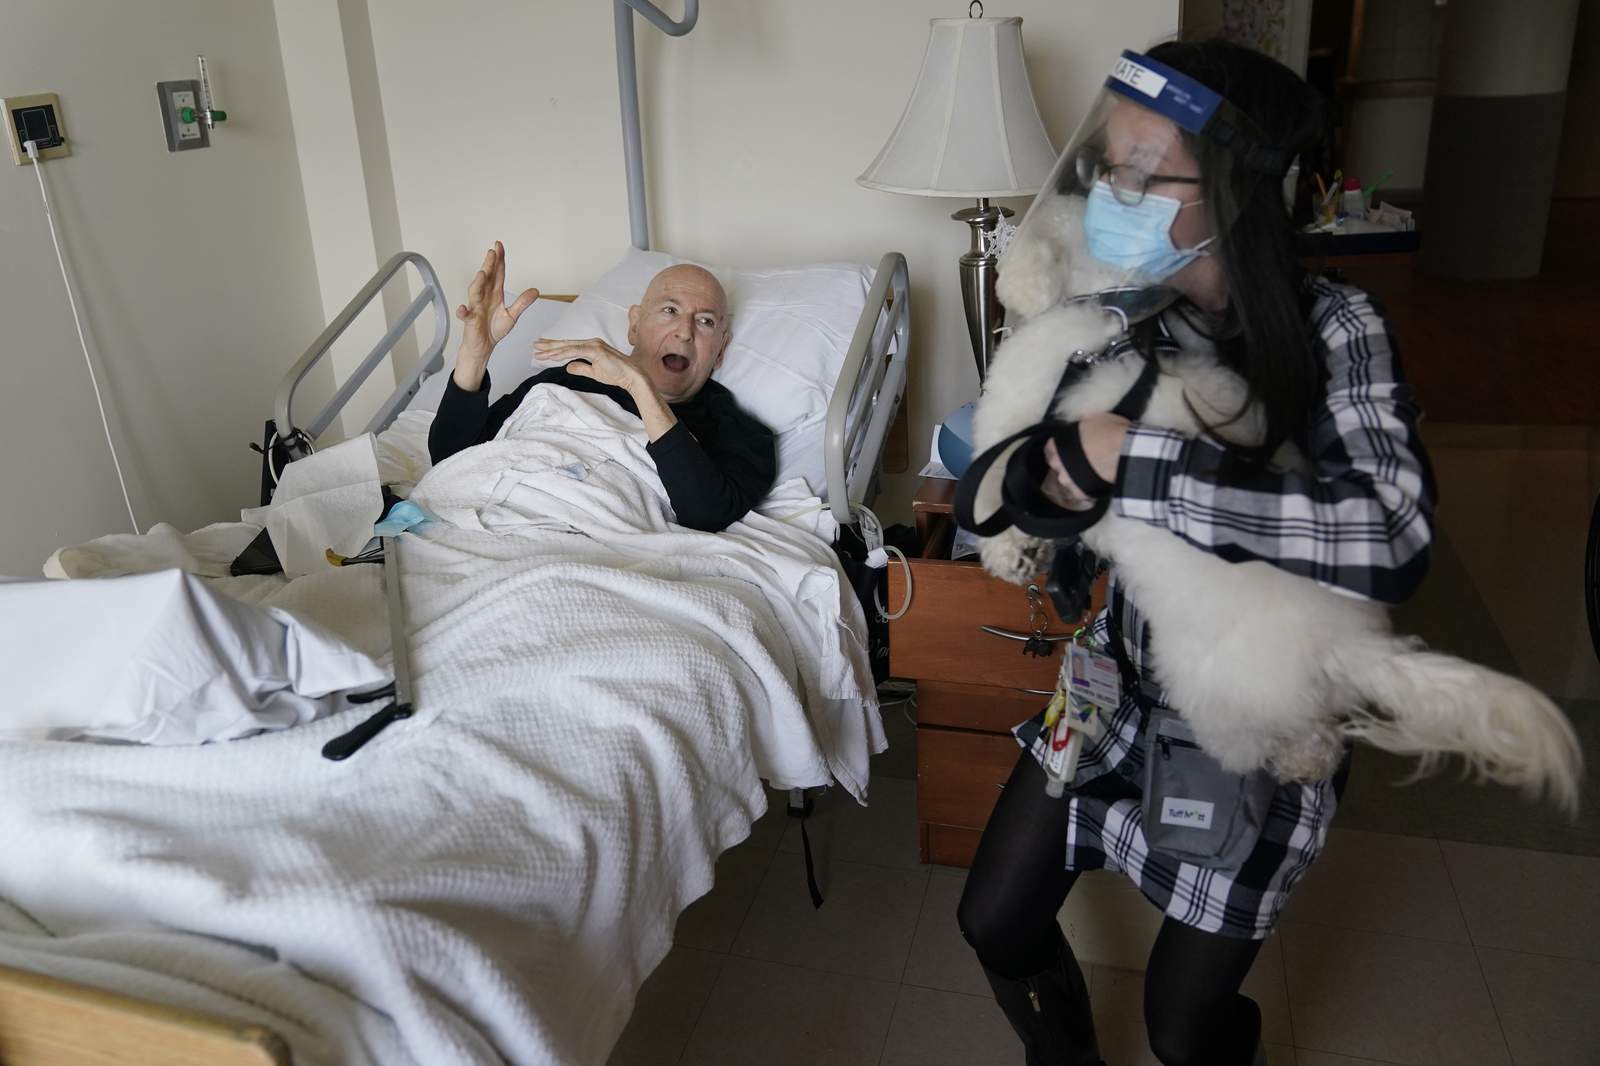 Dogs ease pandemic isolation for nursing home residents